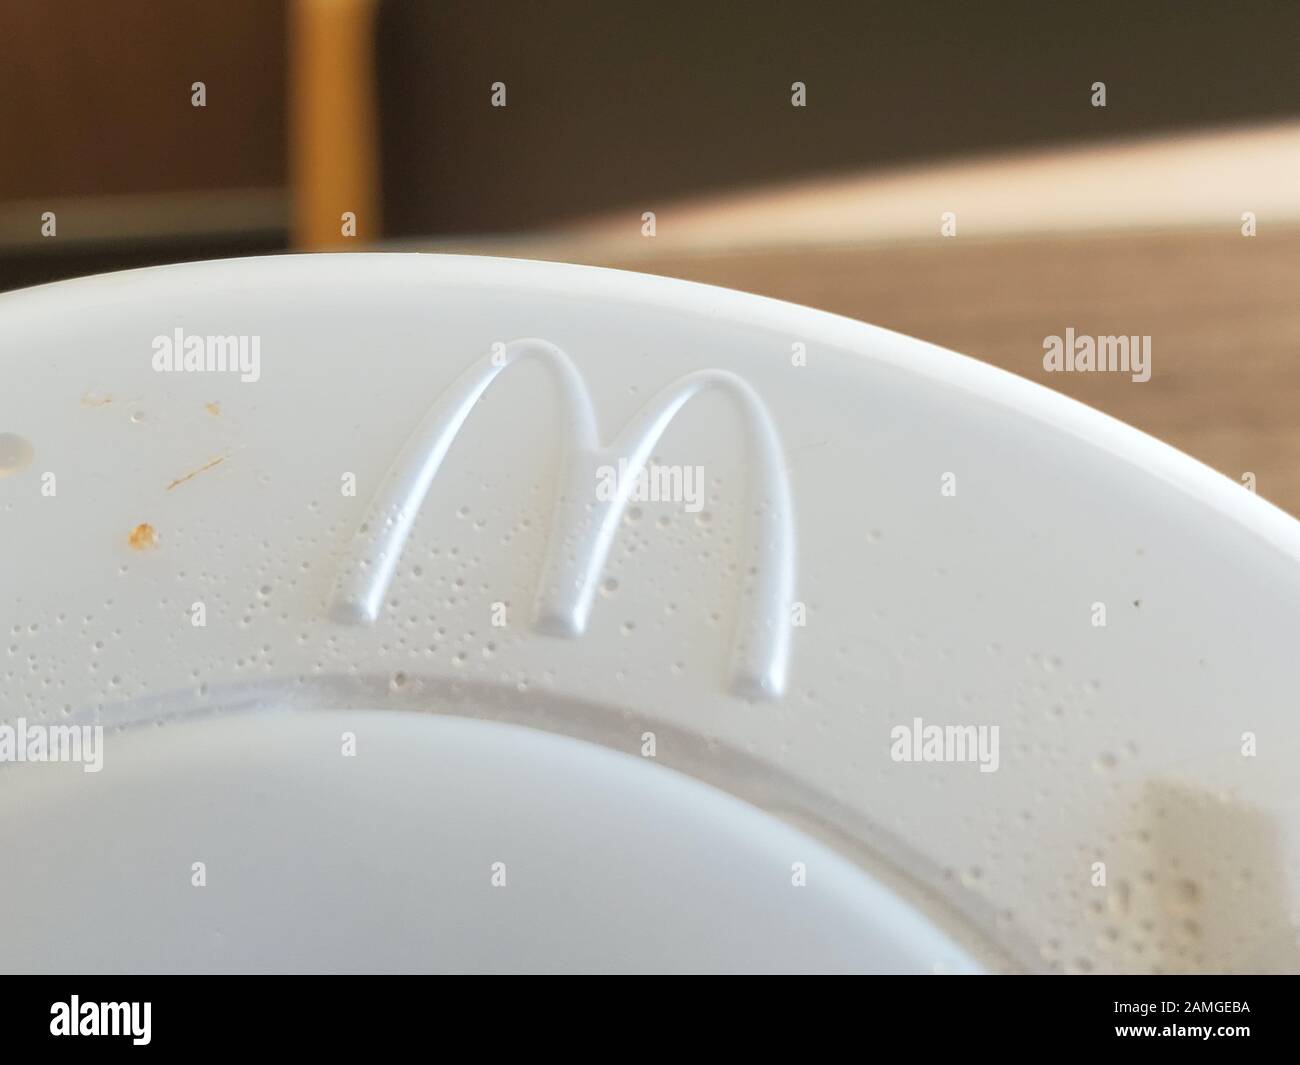 Close-up of the iconic Golden Arches logo for McDonald's on the rim of a plastic drink cup at a fast food restaurant in Coalinga, California, October 26, 2019. () Stock Photo